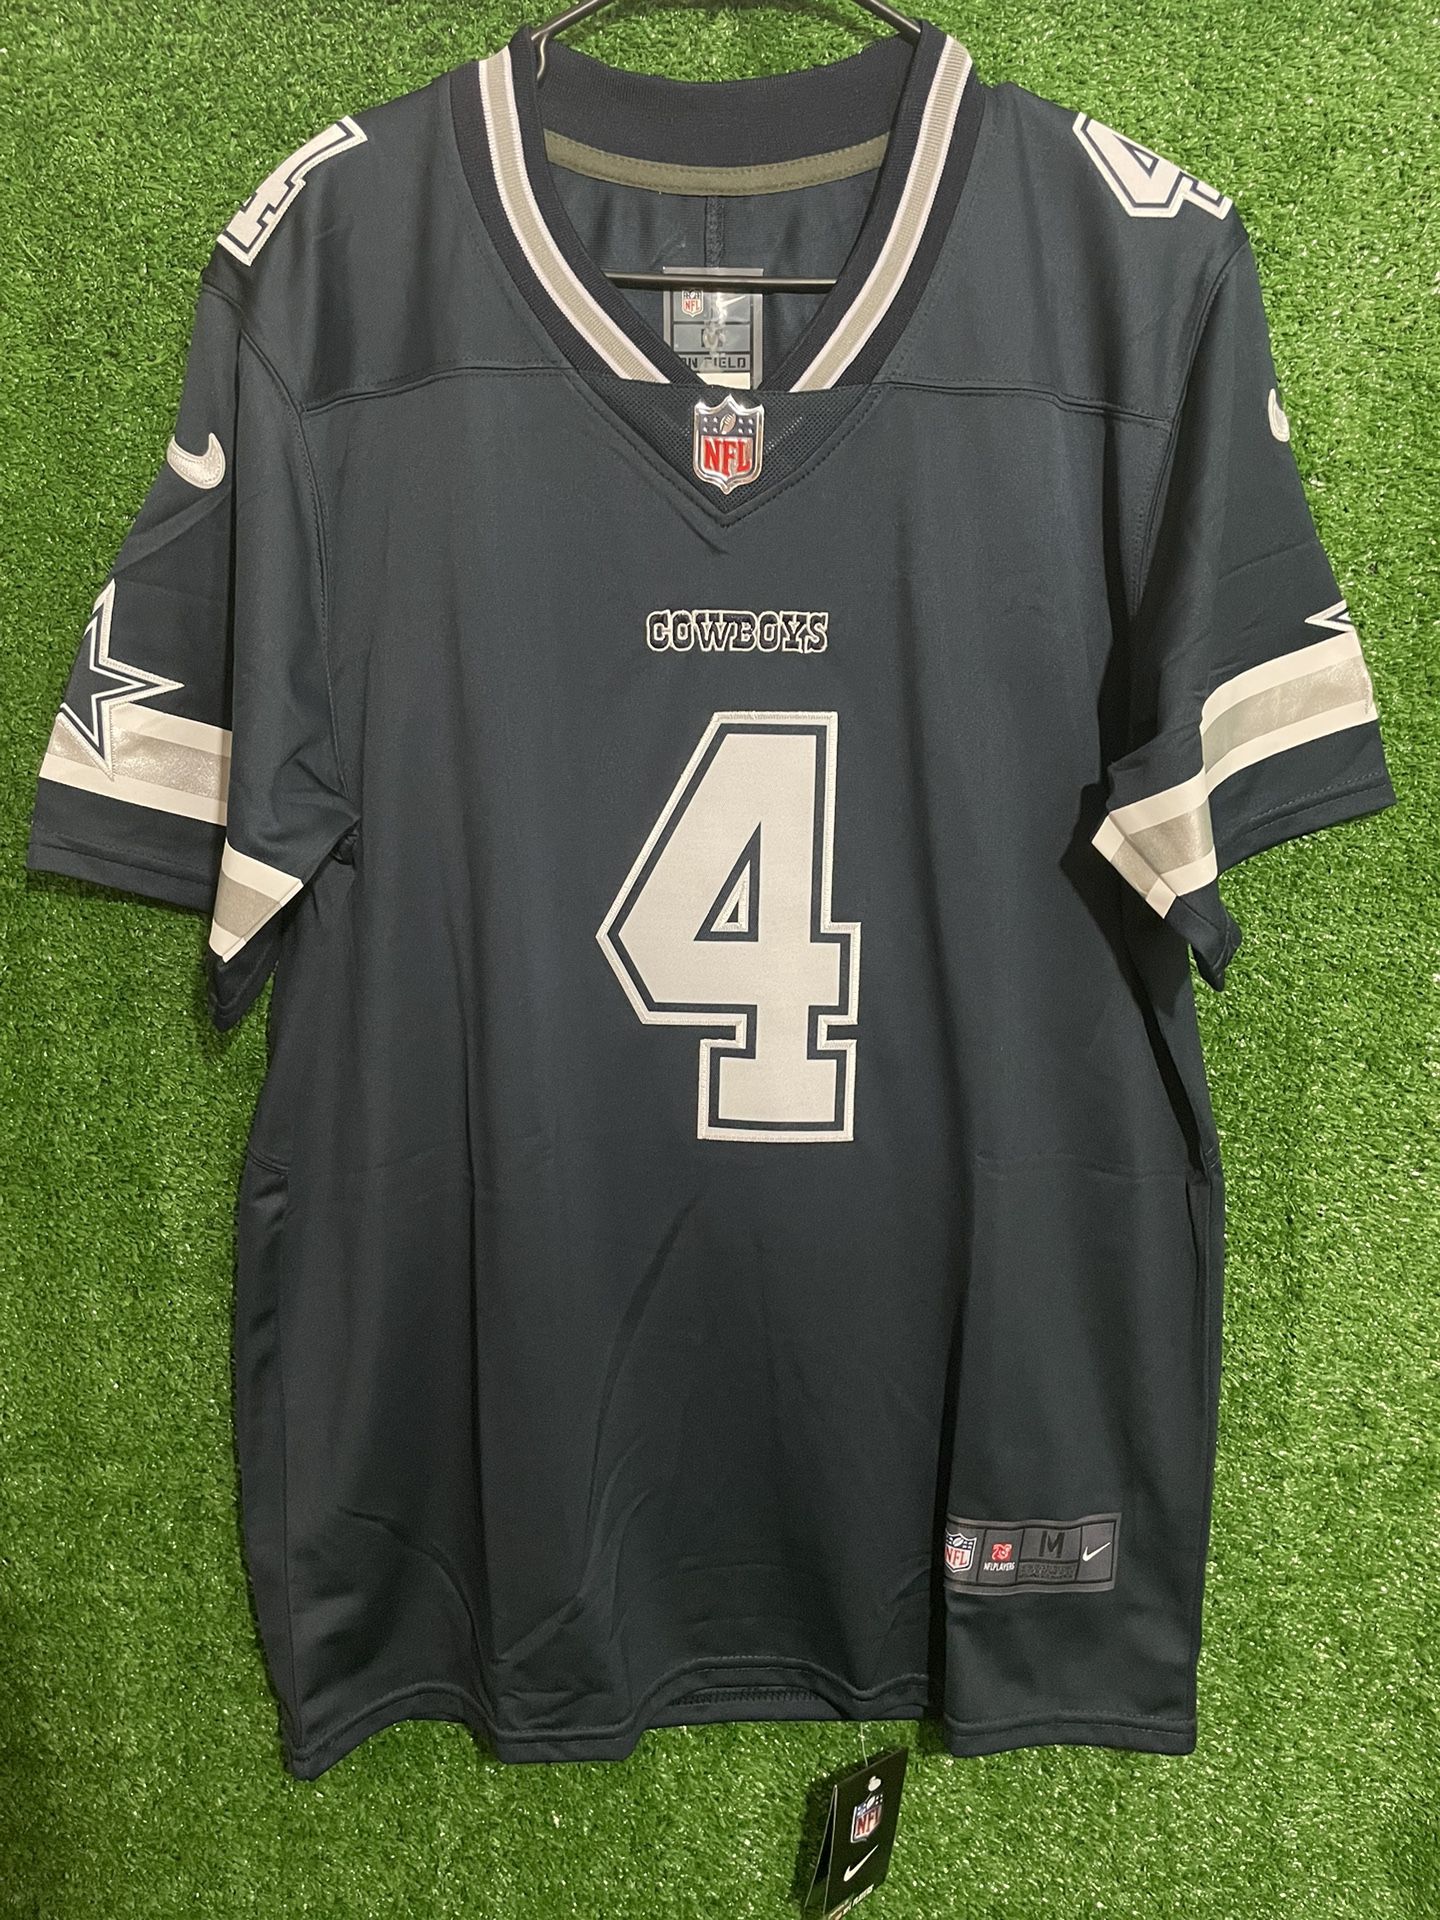 DAK PRESCOTT DALLAS COWBOYS NIKE JERSEY BRAND NEW WITH TAGS SIZES MEDIUM, LARGE AND XL AVAILABLE